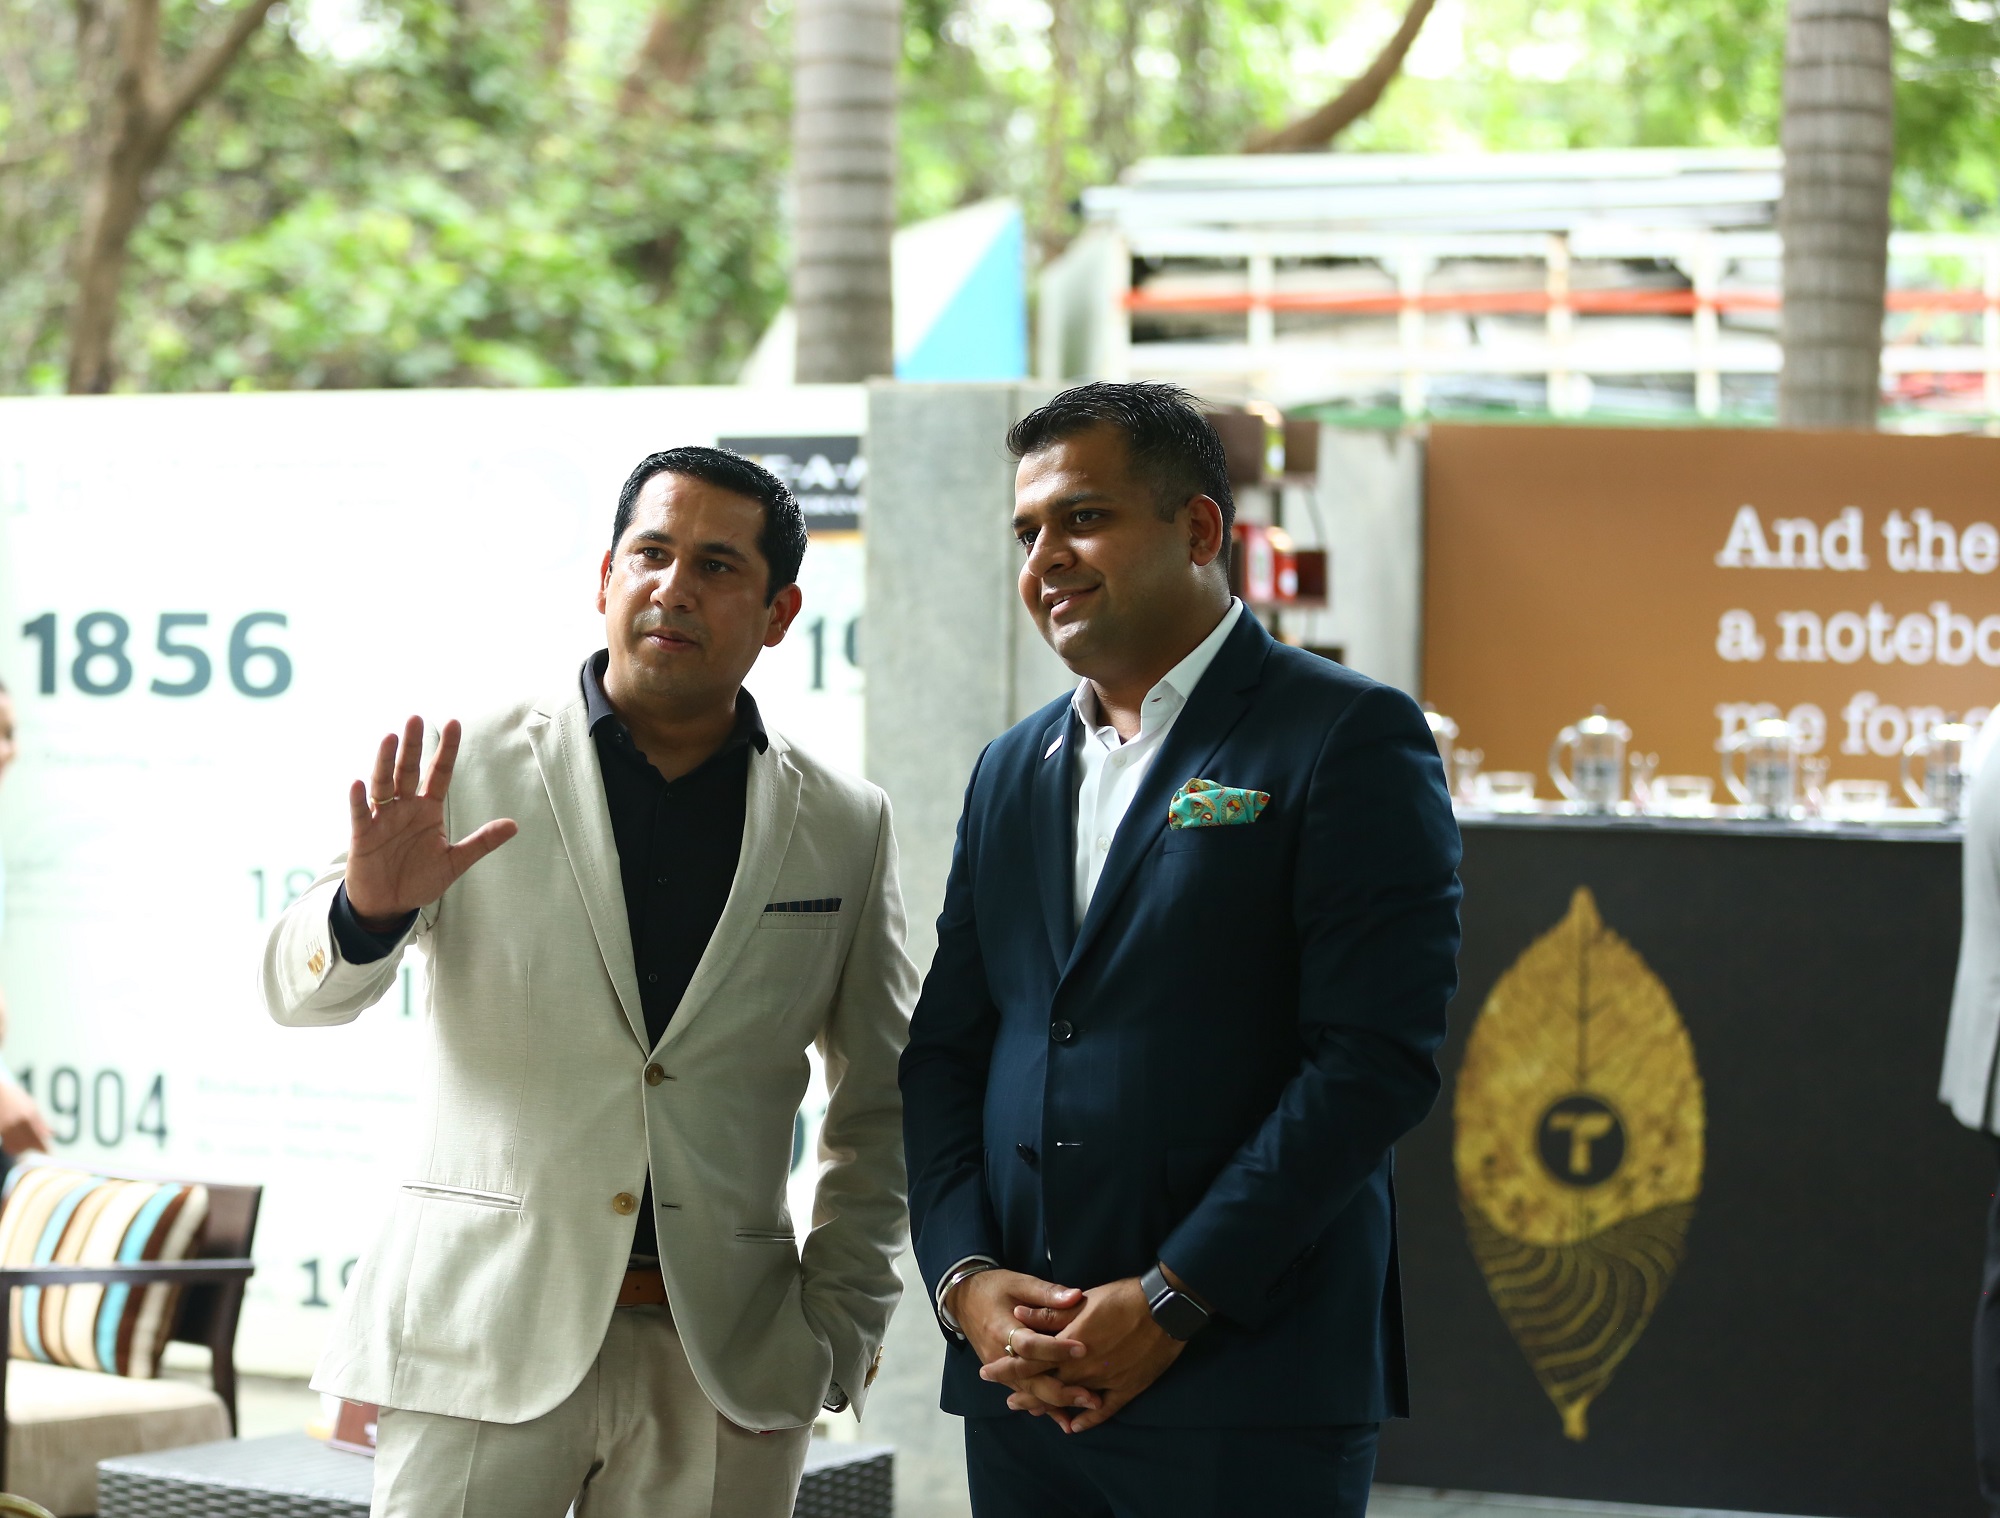 Sumit Miglani, General Manager, Te-A-Me and Akshay Sood, Director of F&B, The Westin Mumbai Garden City at the launch of Prego Alfresco Lounge, The Westin Mumbai Garden City